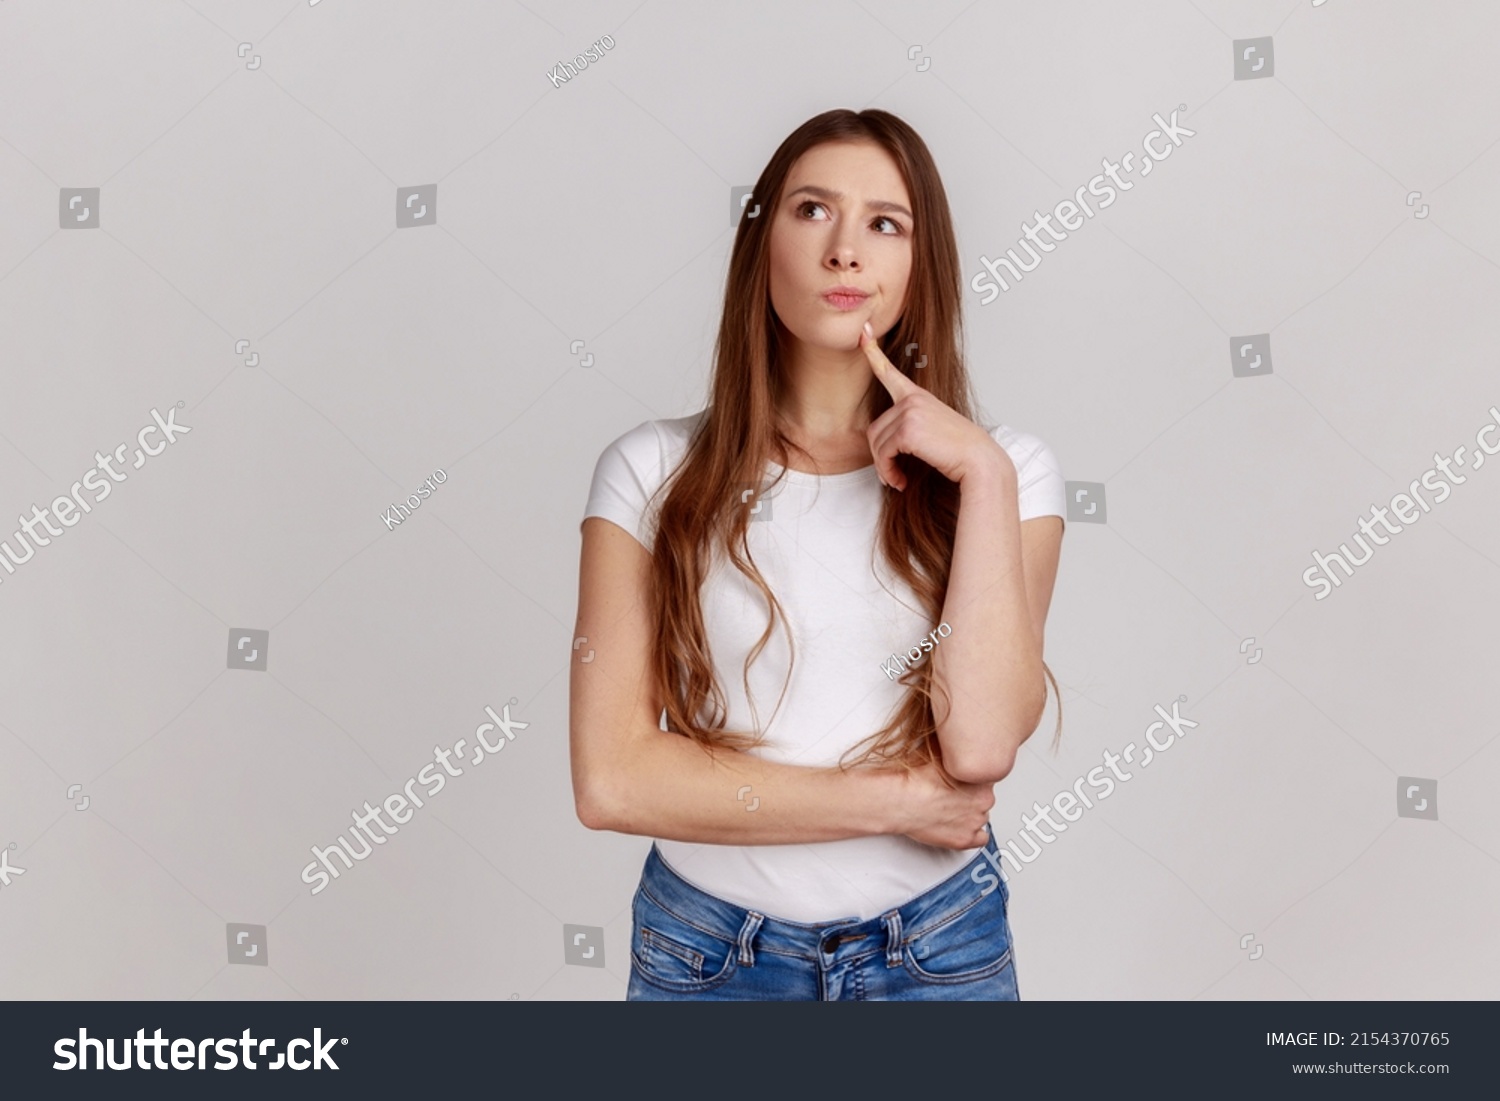 Portrait of standing with thoughtful serious smart expression, pondering answer, having doubts and suspicion, wearing white T-shirt. Indoor studio shot isolated on gray background. #2154370765